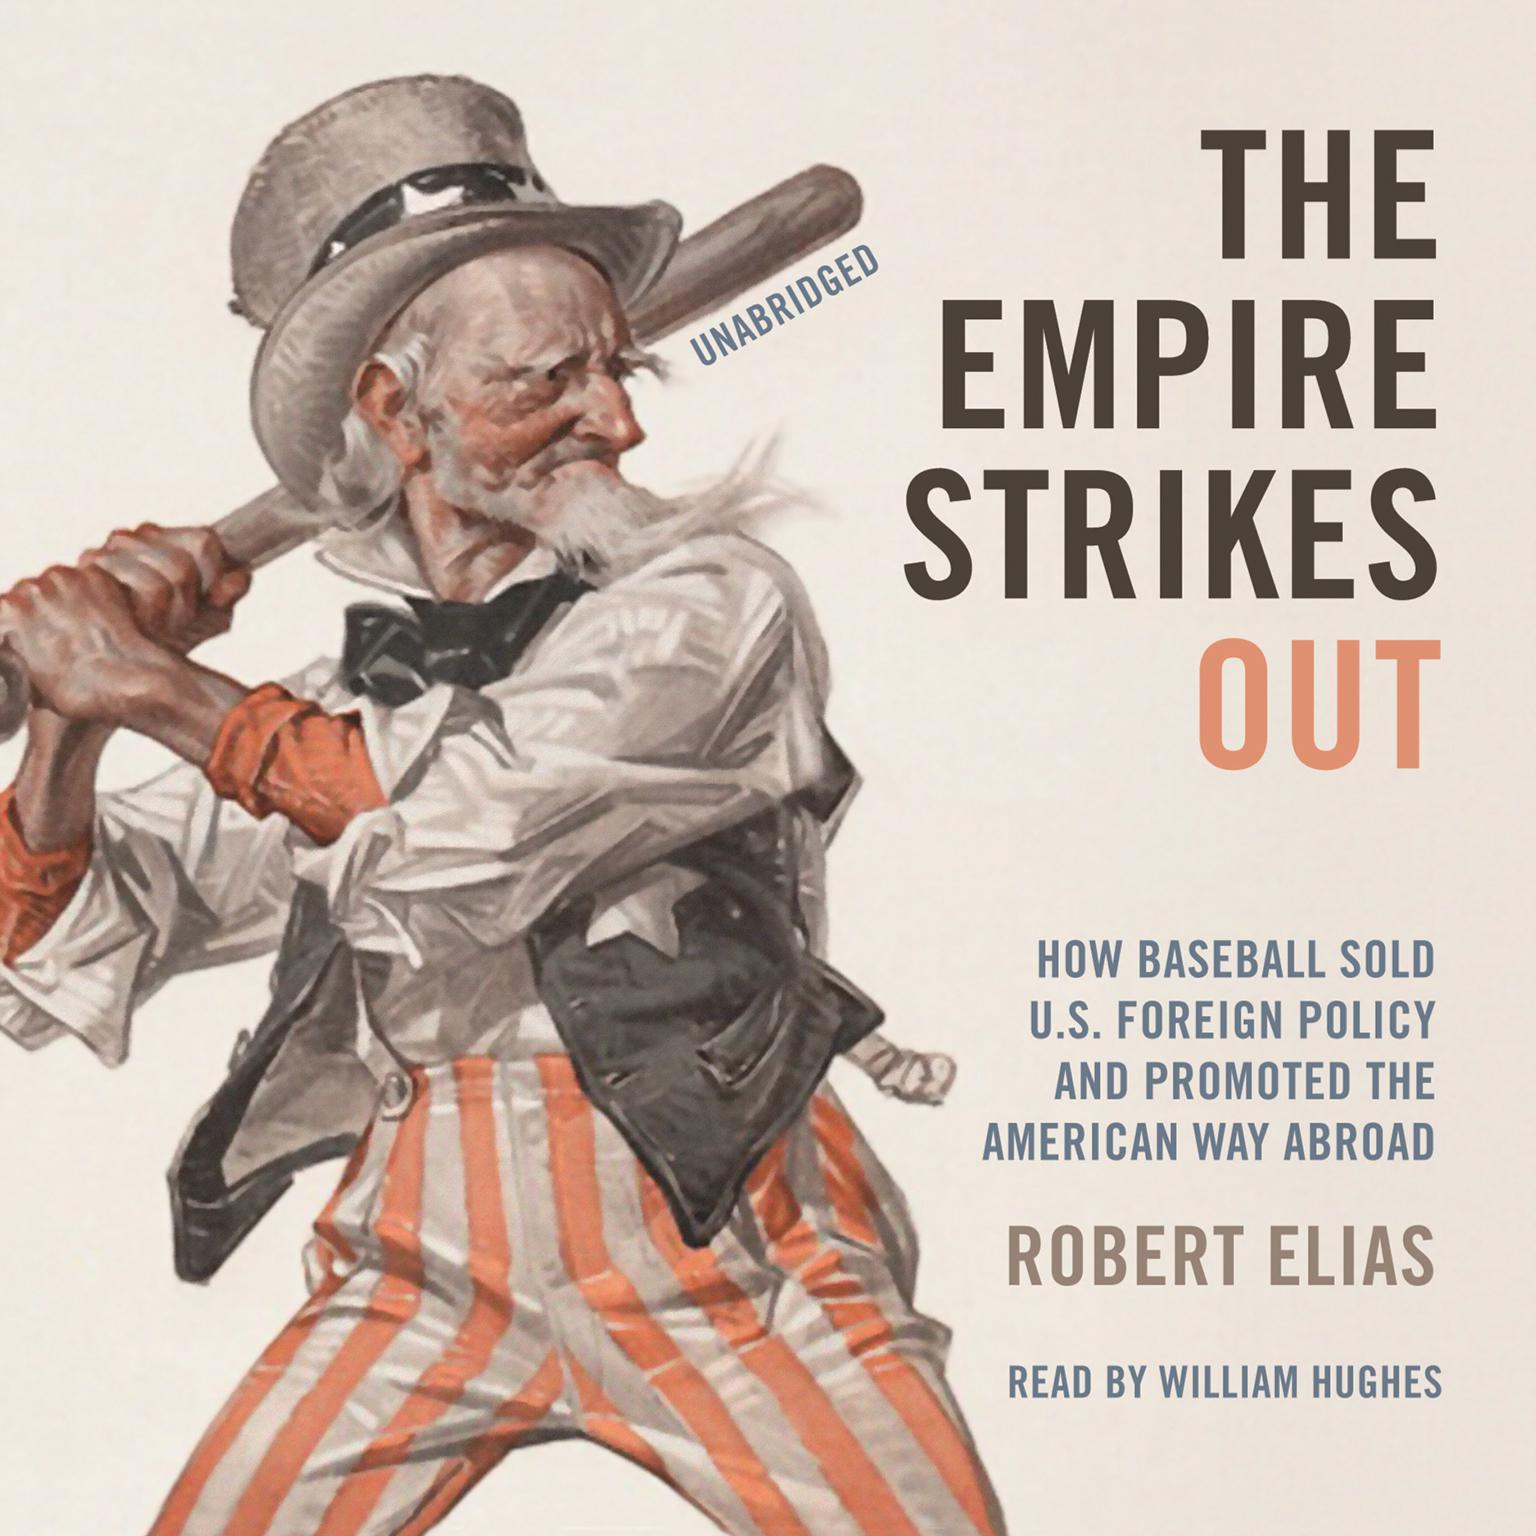 The Empire Strikes Out: How Baseball Sold U.S. Foreign Policy and Promoted the American Way Abroad Audiobook, by Robert Elias